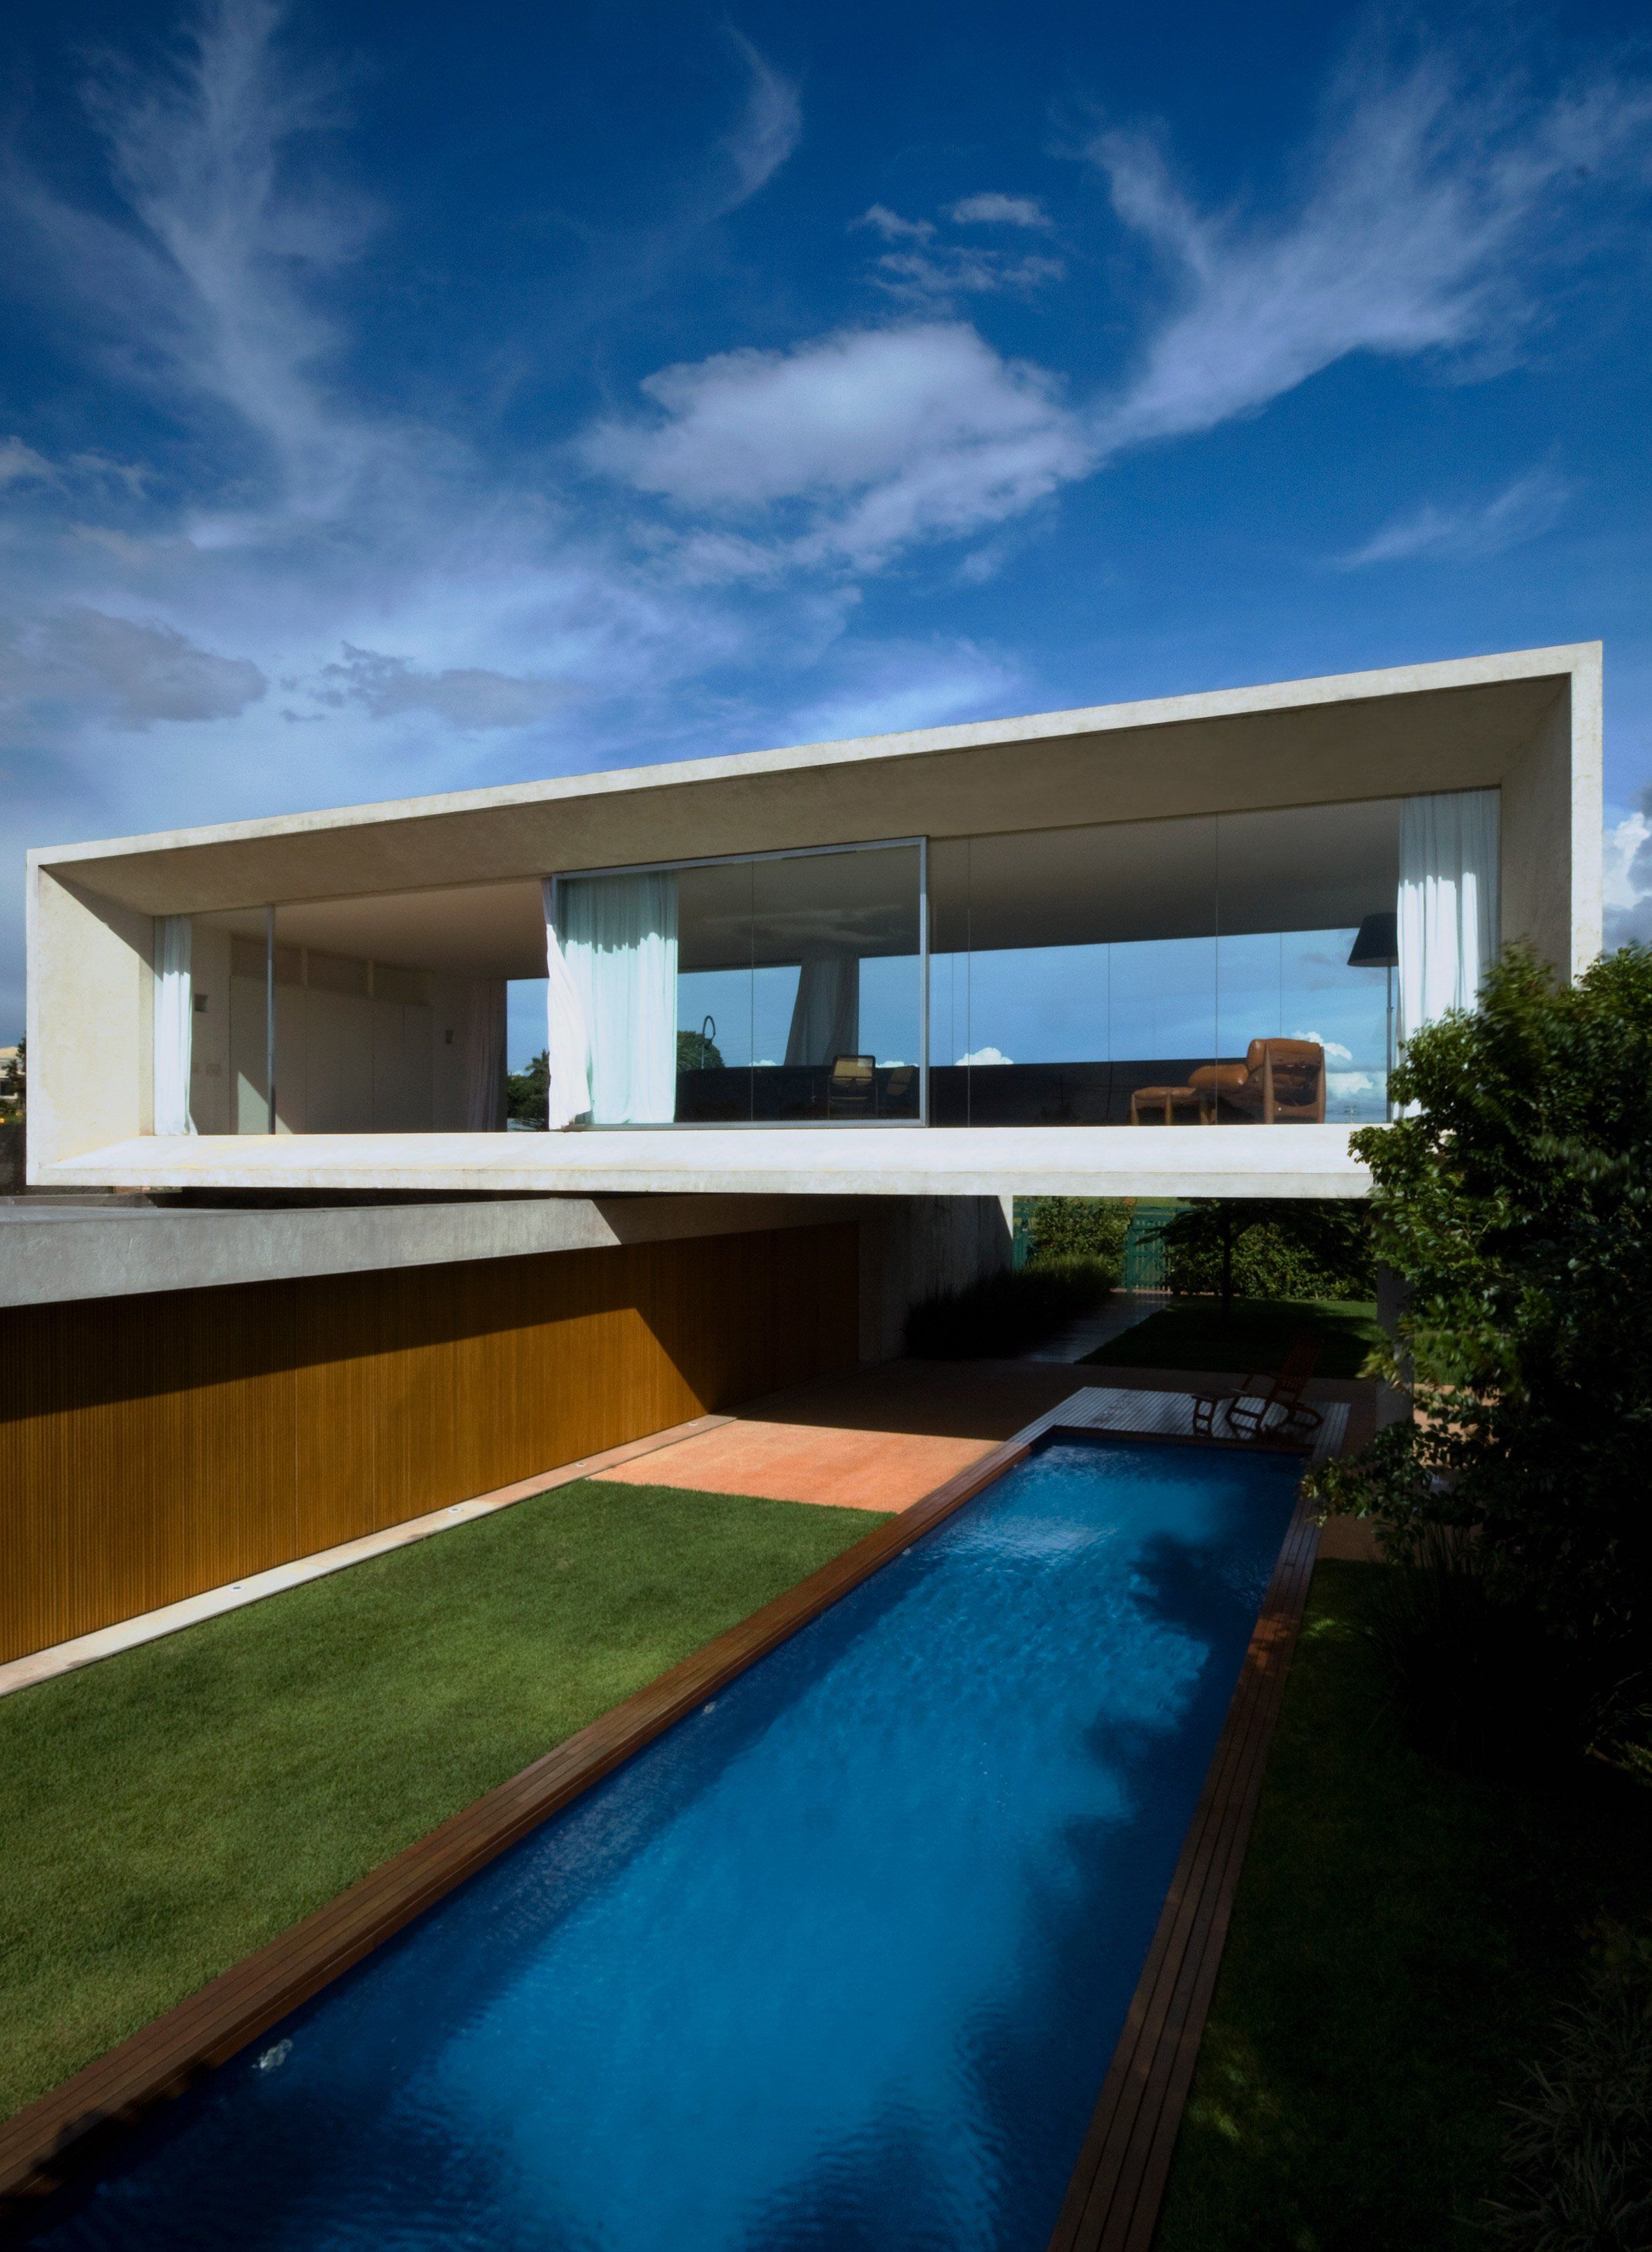 Studio MK27 takes cues from Brazilian modernism for Osler House in ...